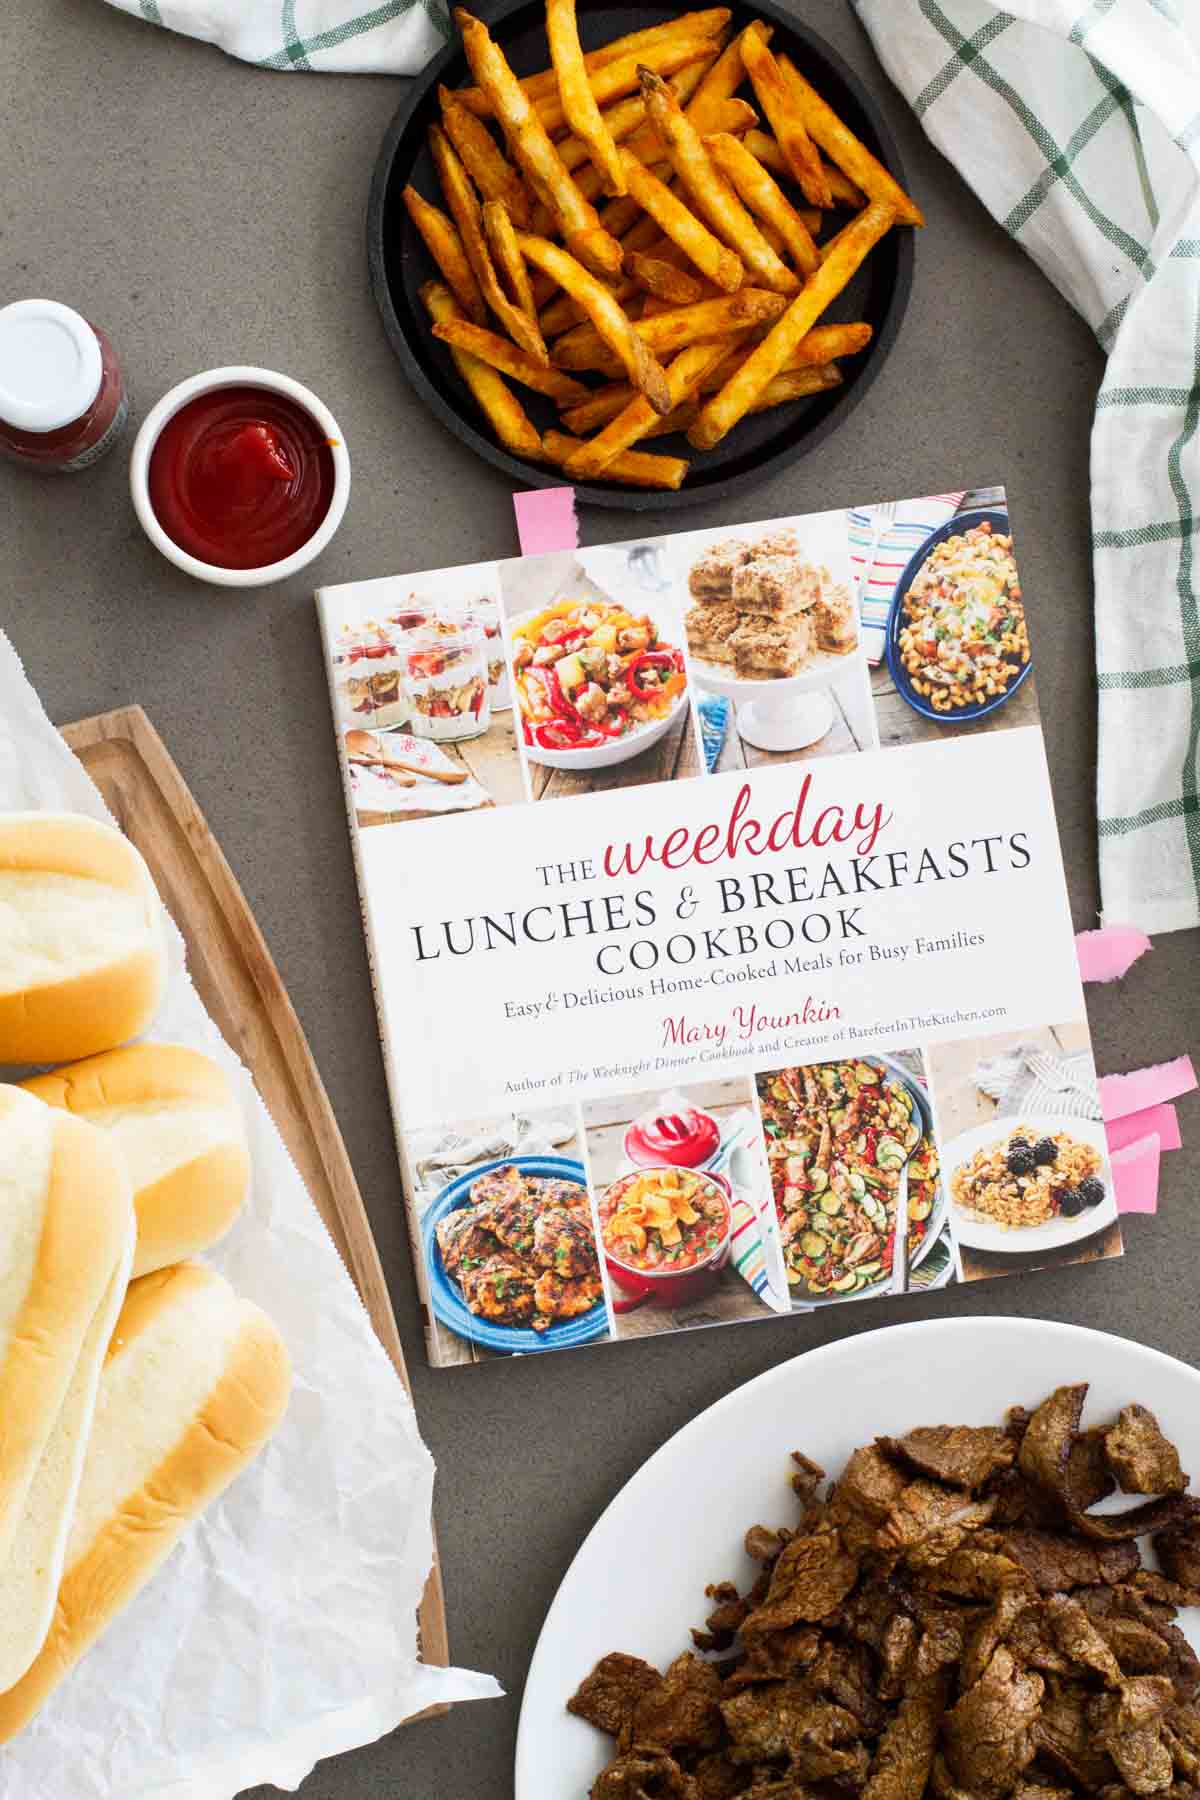 The Weekday Lunches & Breakfasts Cookbook surrounded by ingredients